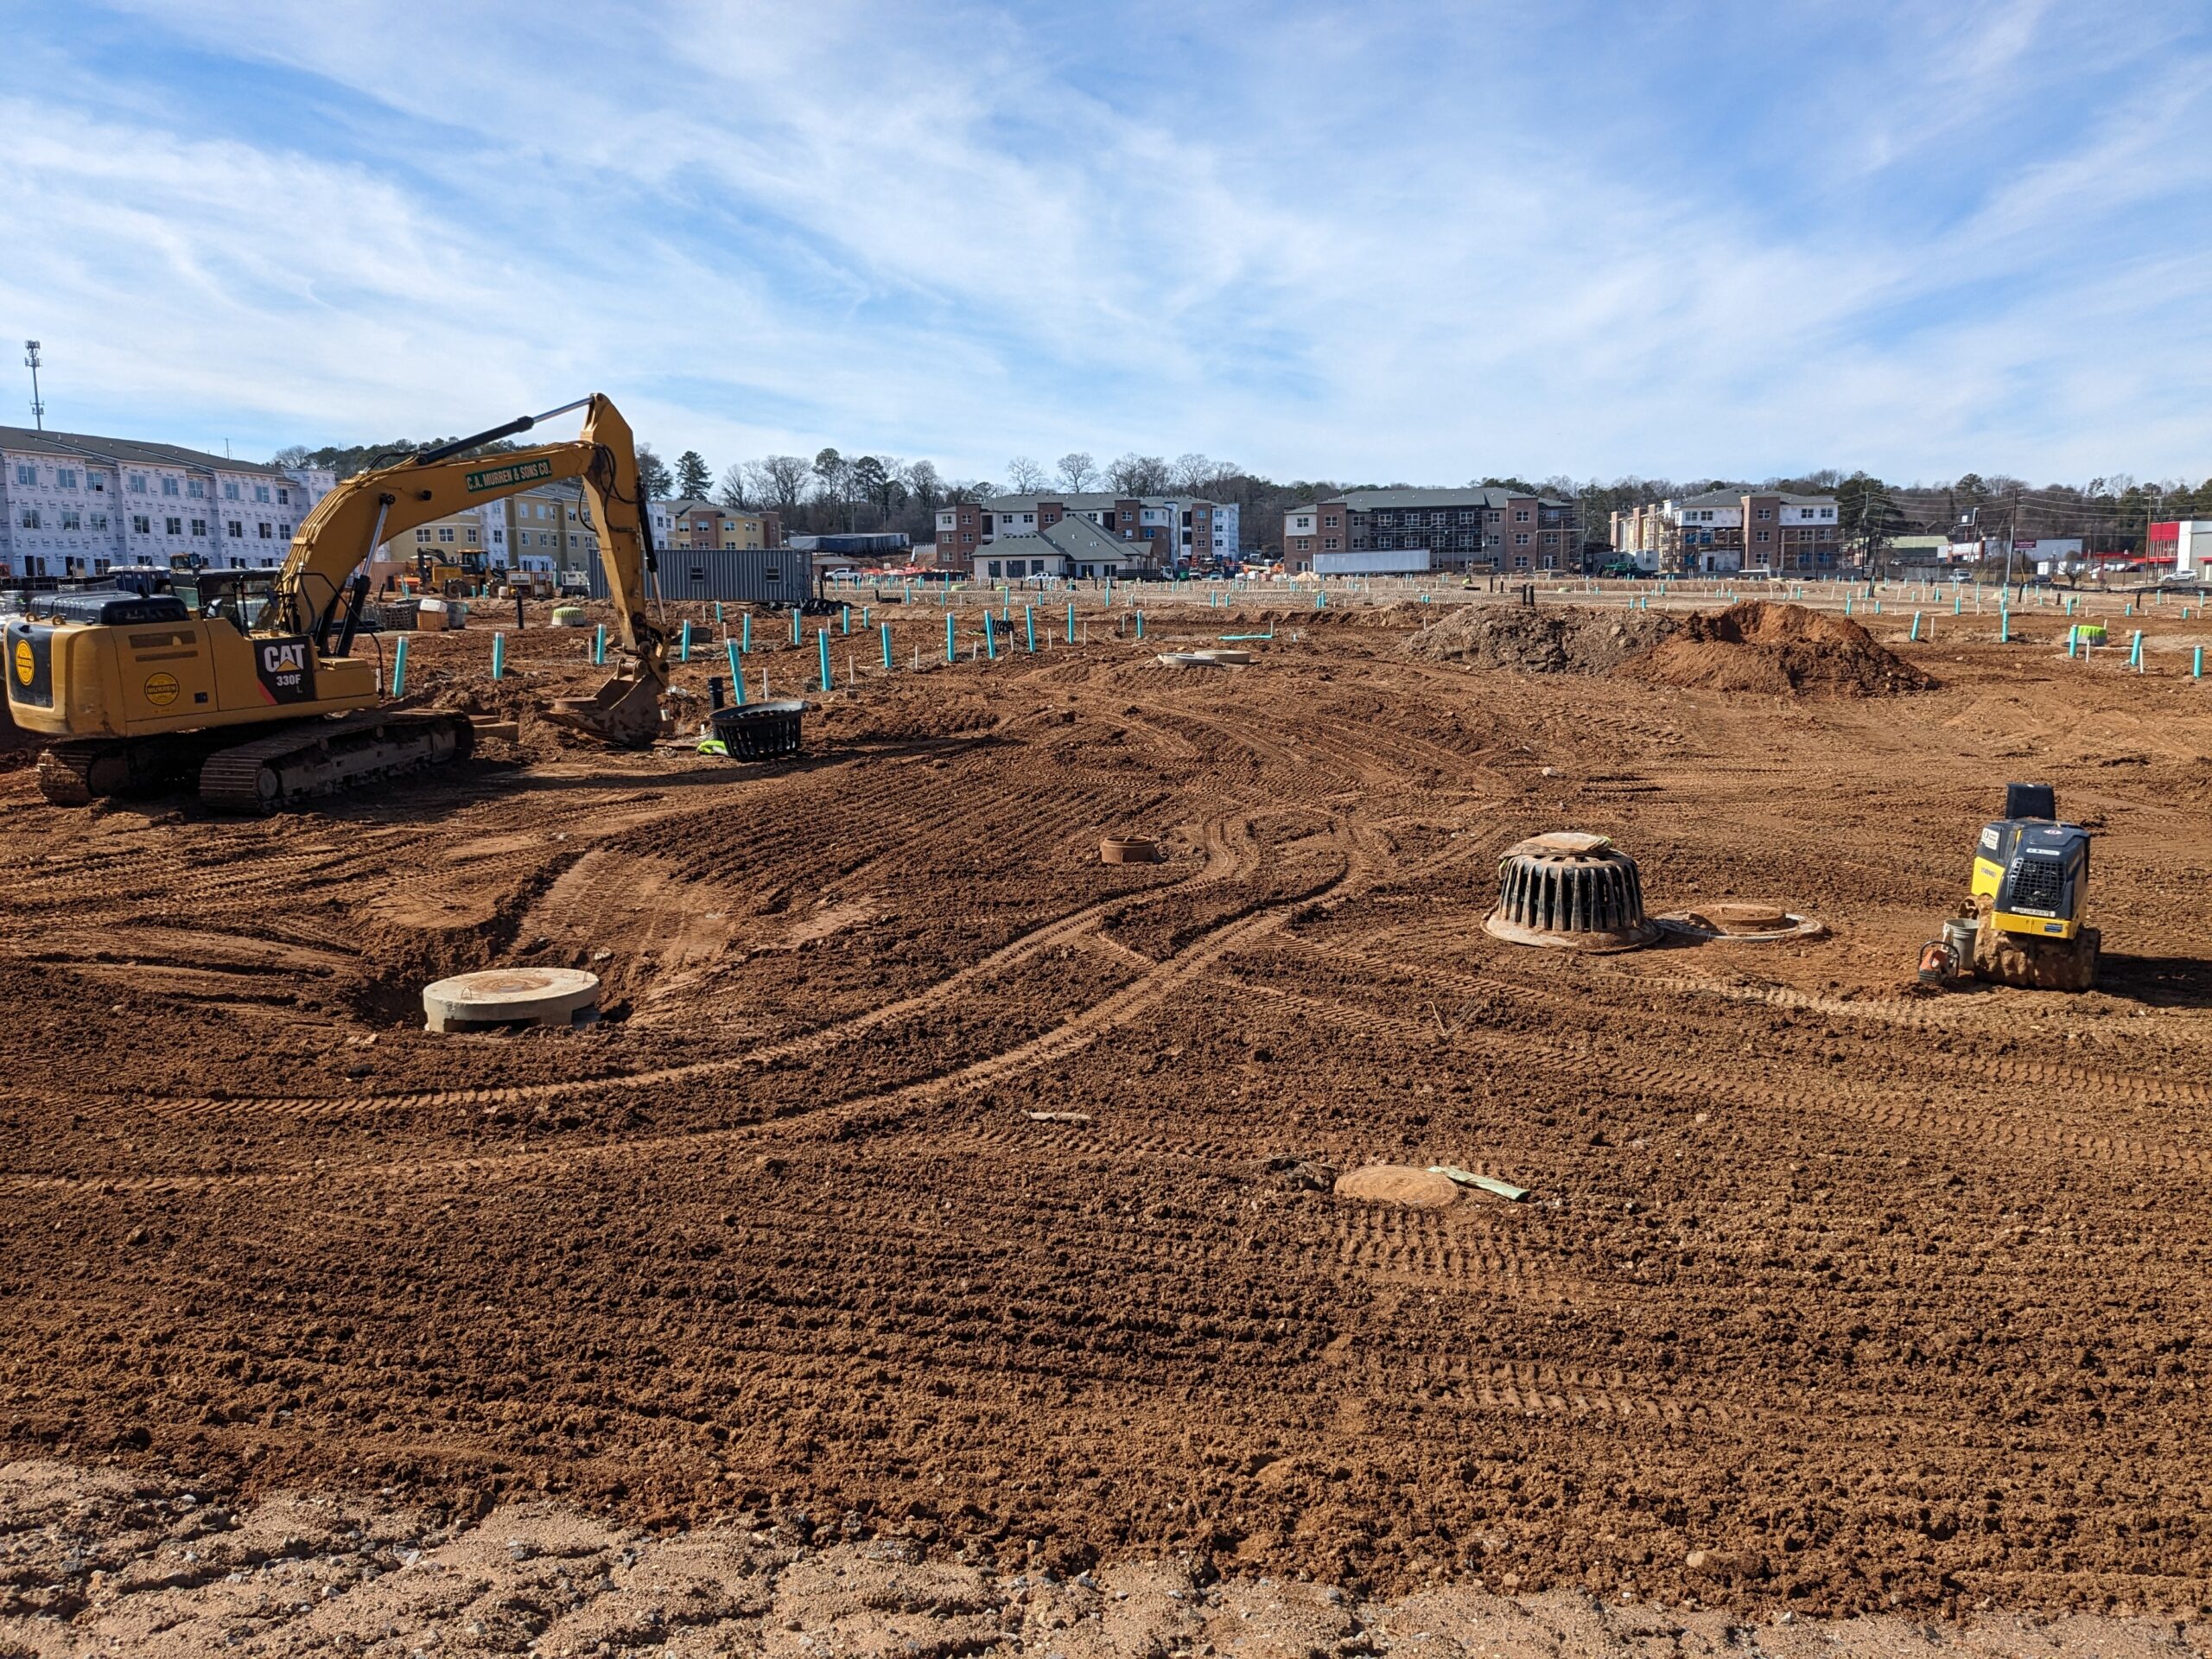 A flattened, dirt, residential construction site with a CAT excavator parked on the side.